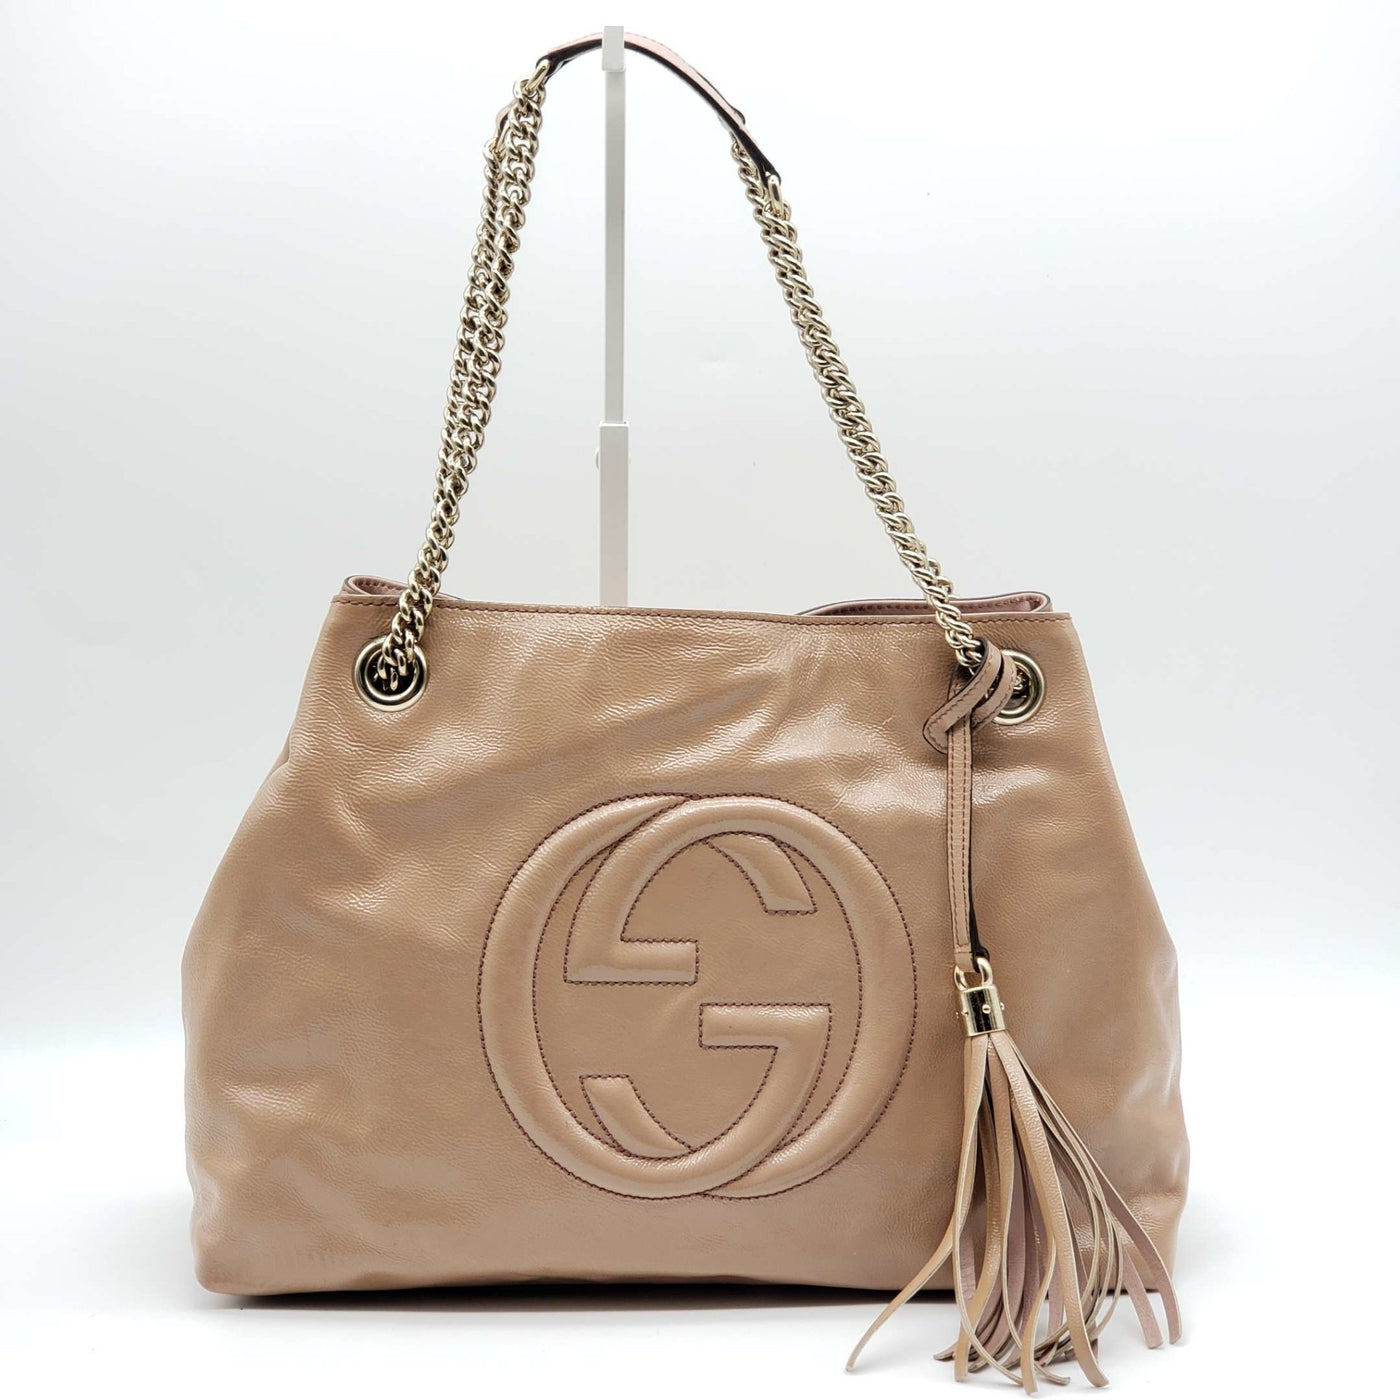 Gucci Soho Patent Leather Shoulder Bag | Luxury Cheaper.